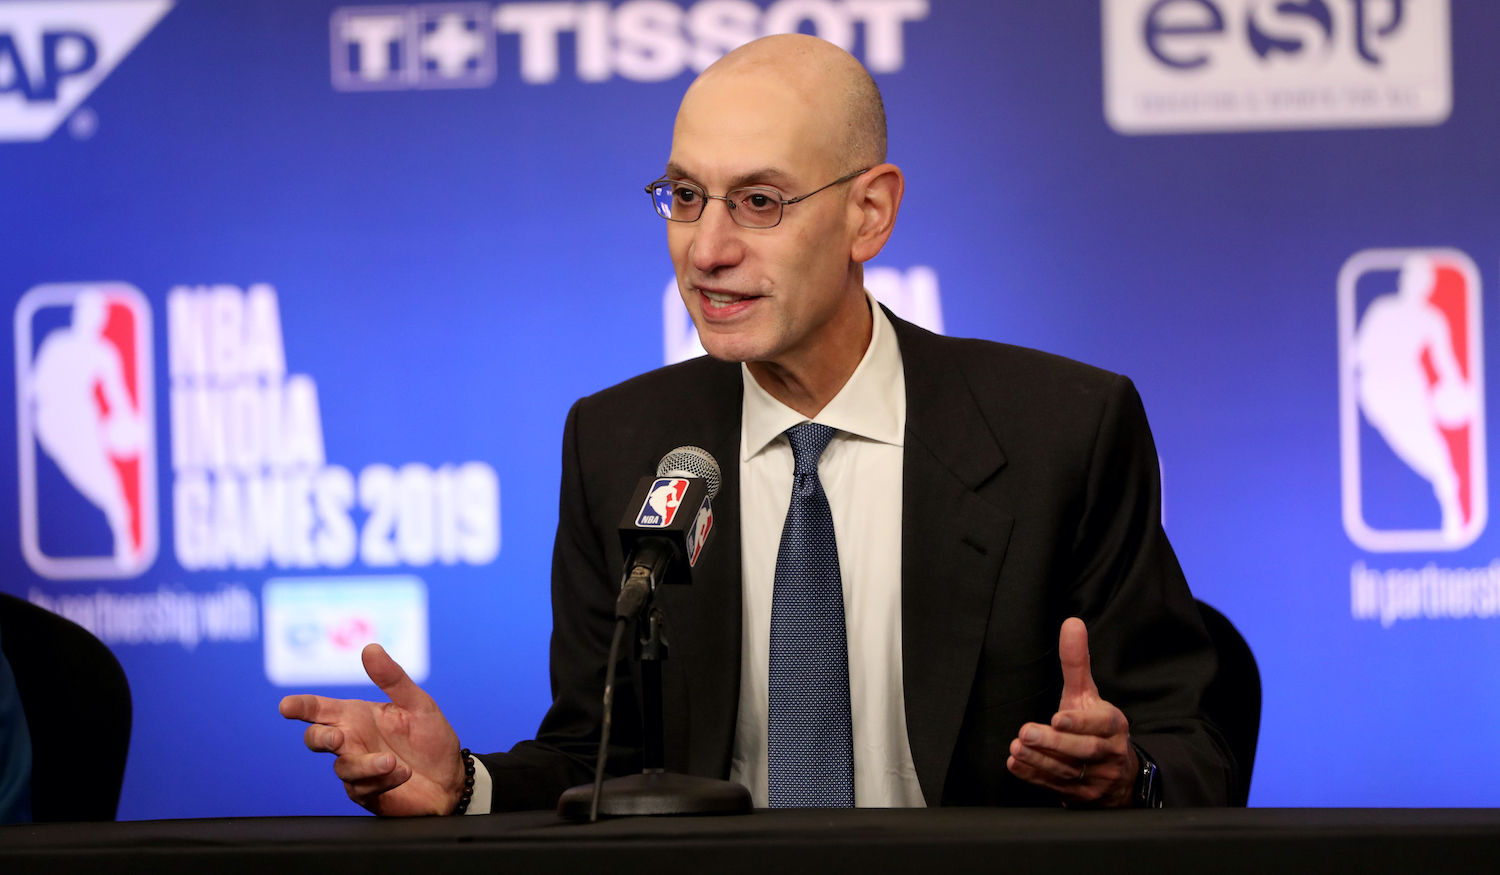 MUMBAI, INDIA - OCTOBER 4: NBA Commissioner Adam Silver speaks to the media prior to the game at the NCSI Dome on October 4, 2019 in Mumbai, India. NOTE TO USER: User expressly acknowledges and agrees that, By downloading and or using this Photograph, user is consenting to the terms and conditions of the Getty Images License Agreement. Mandatory Copyright Notice: Copyright 2019 NBAE (Photo by Joe Murphy/NBAE via Getty Images)